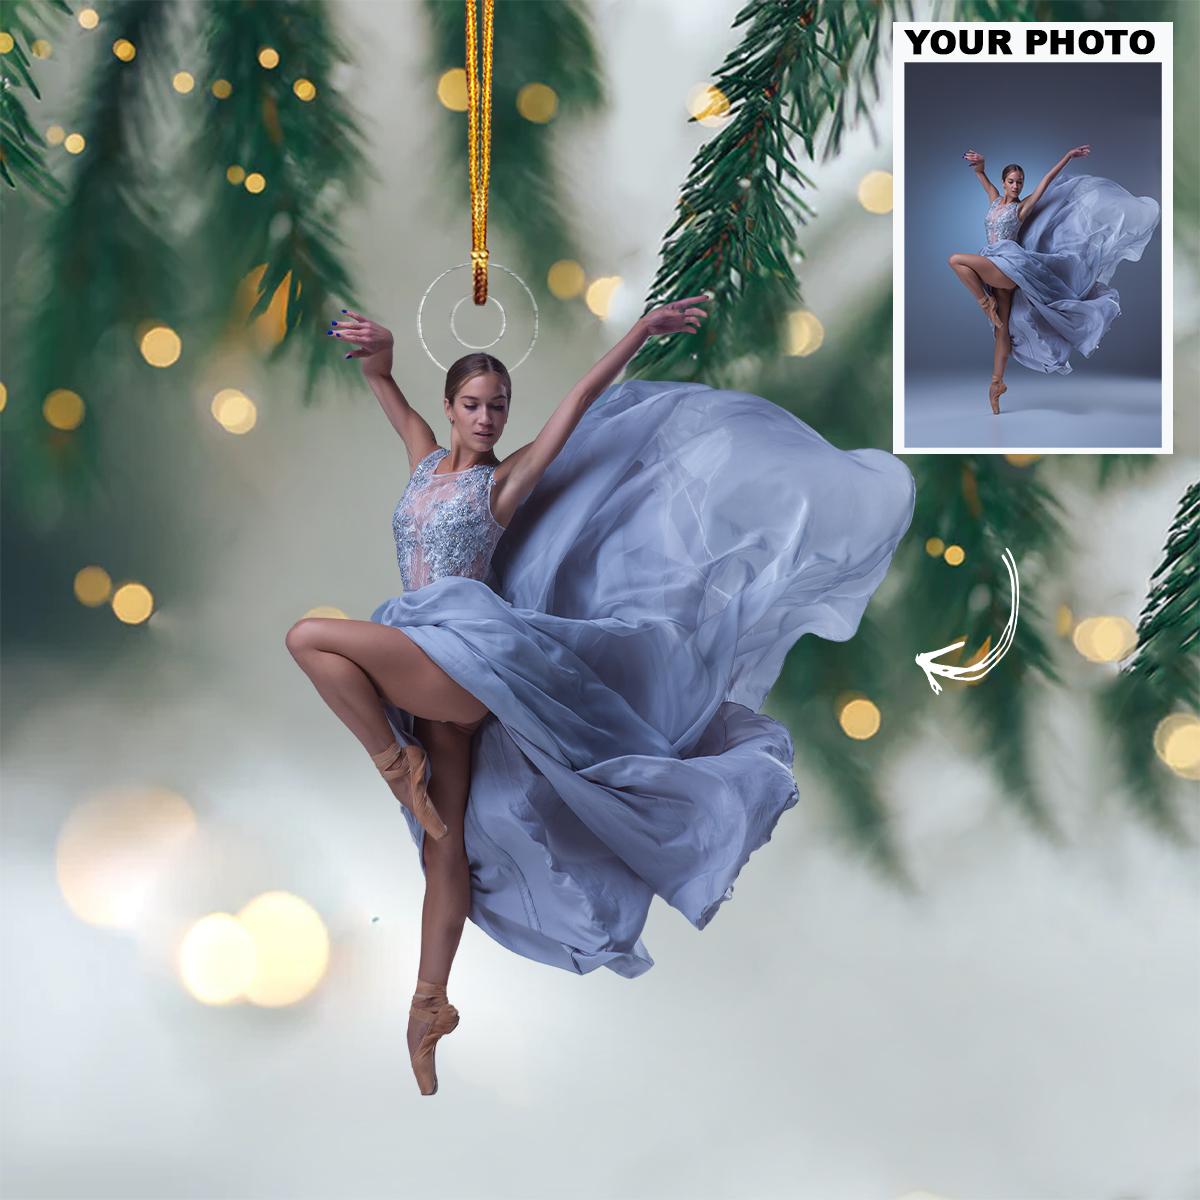 Ballet Dancers - Personalized Photo Mica Ornament - Customized Your Photo Ornament - Christmas Gift For Ballet Dancer, Ballerinas, Ballet Lovers